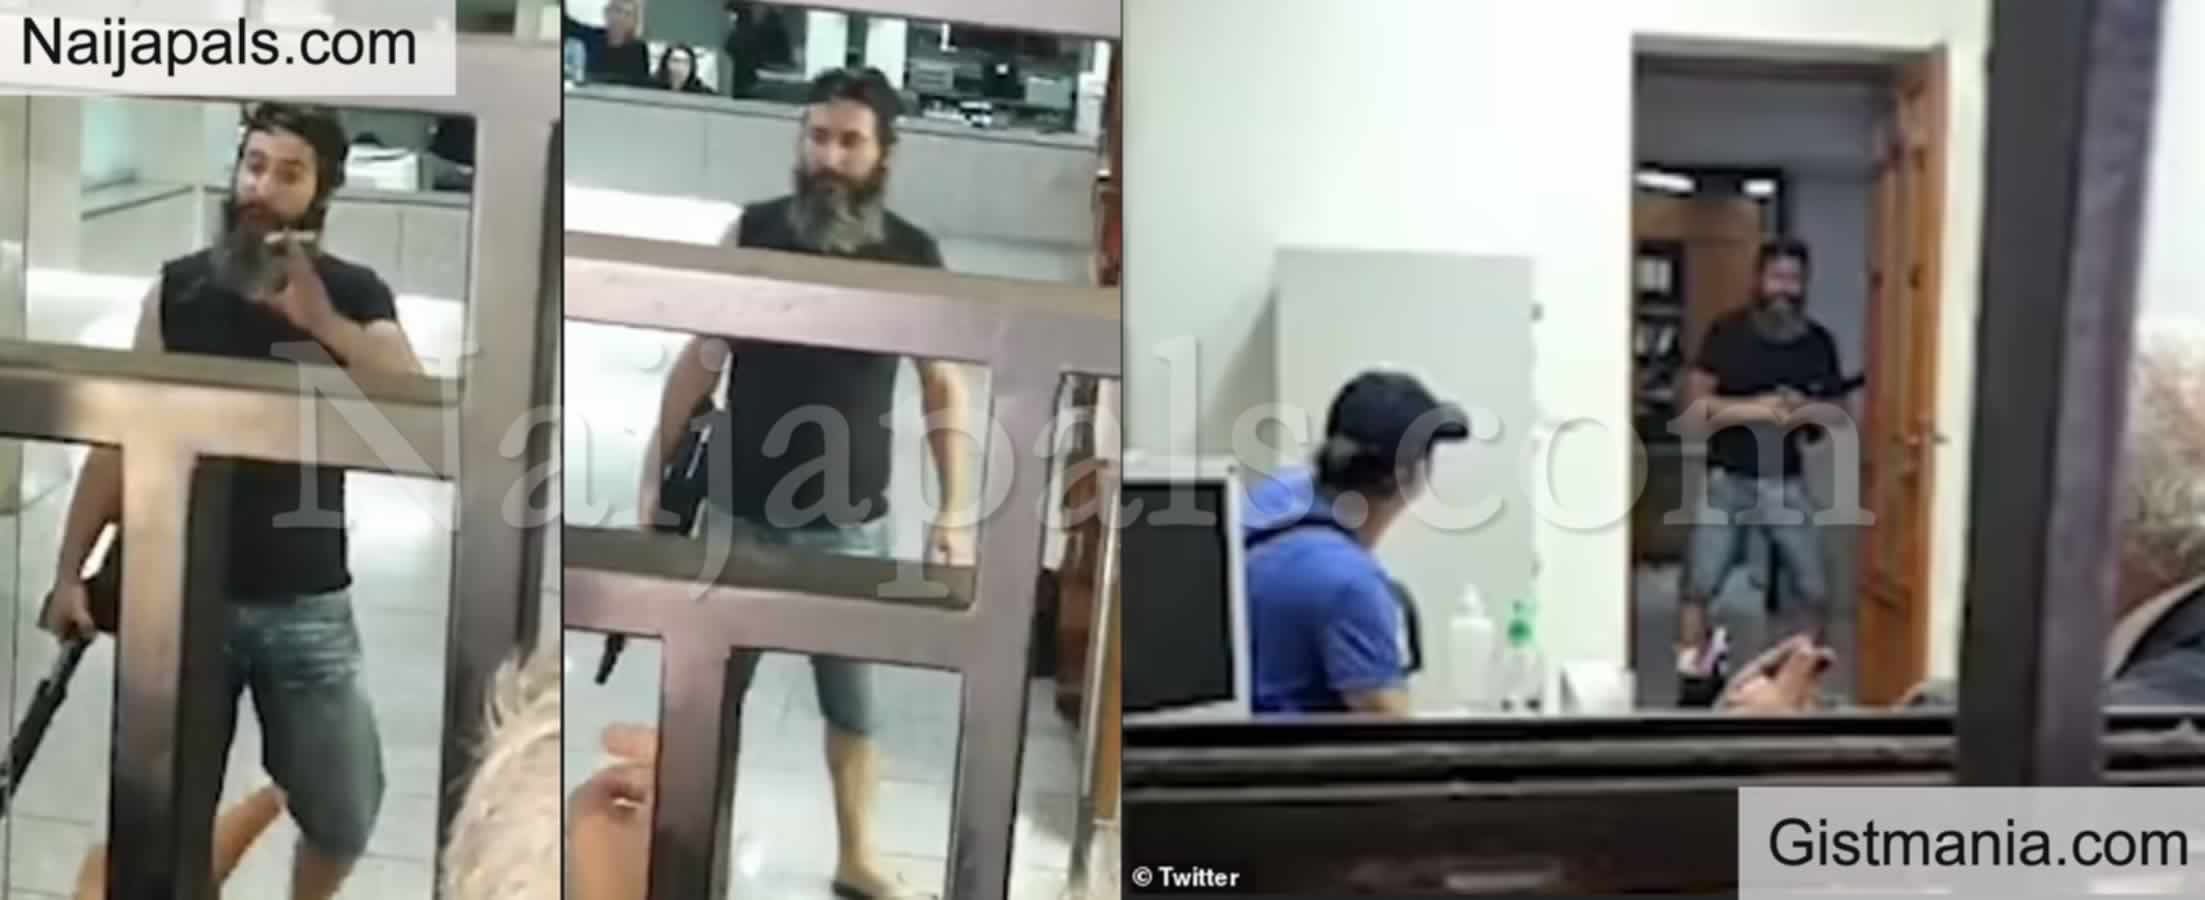 <img alt='.' class='lazyload' data-src='https://img.gistmania.com/emot/video.gif' /> <b>Furious Man Storm Bank Holds Bank Staff Hostage With A Gun, Demand $200k Locked In His Account</b>